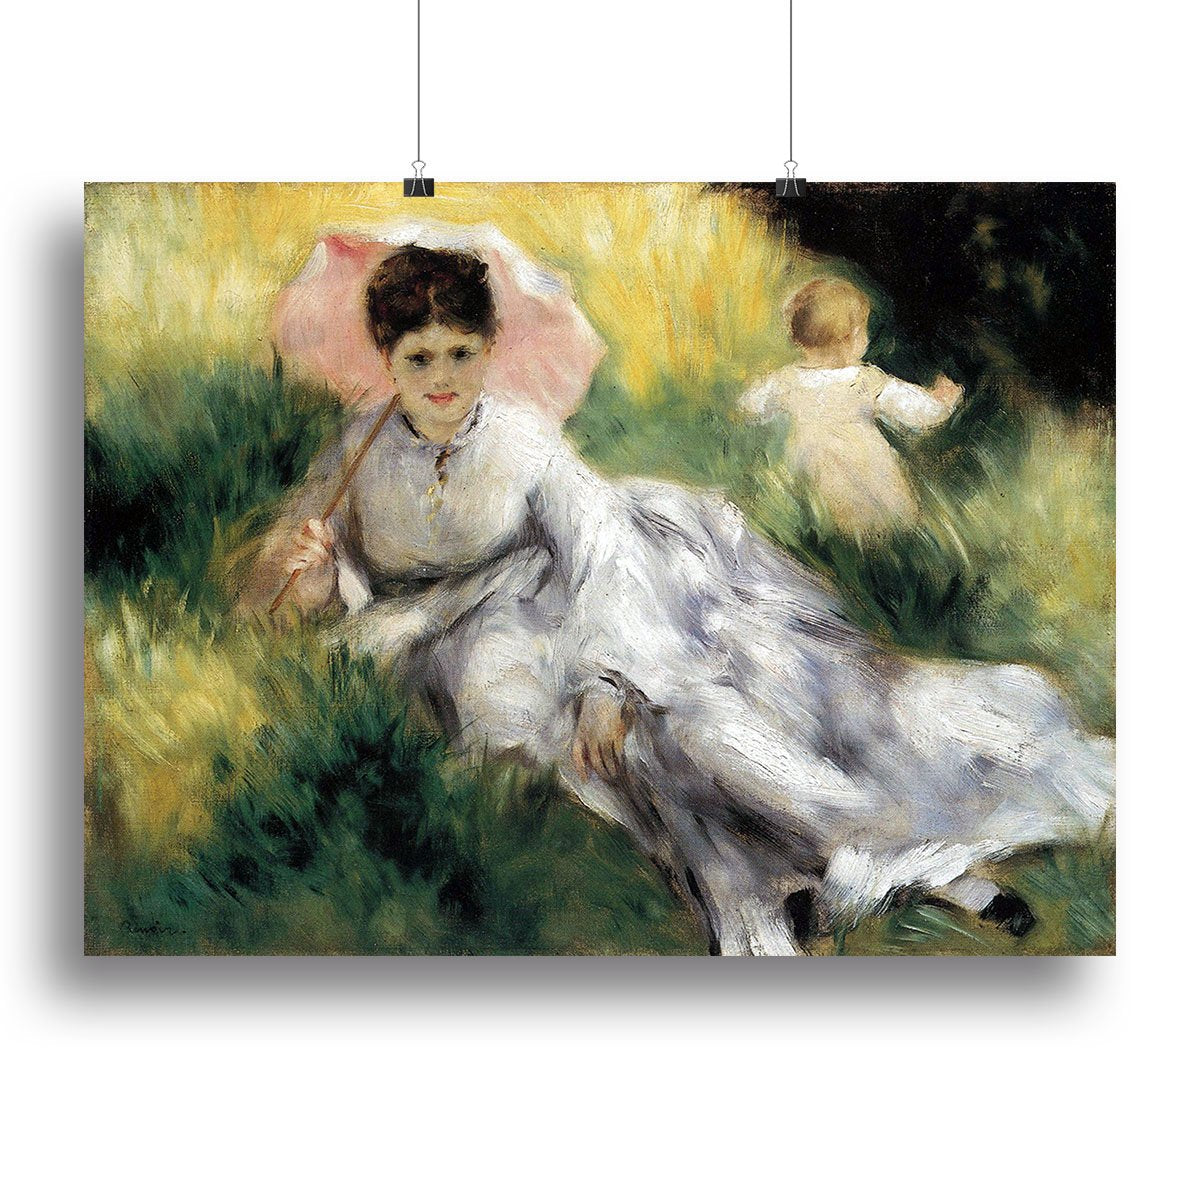 Woman with Parasol by Renoir Canvas Print or Poster